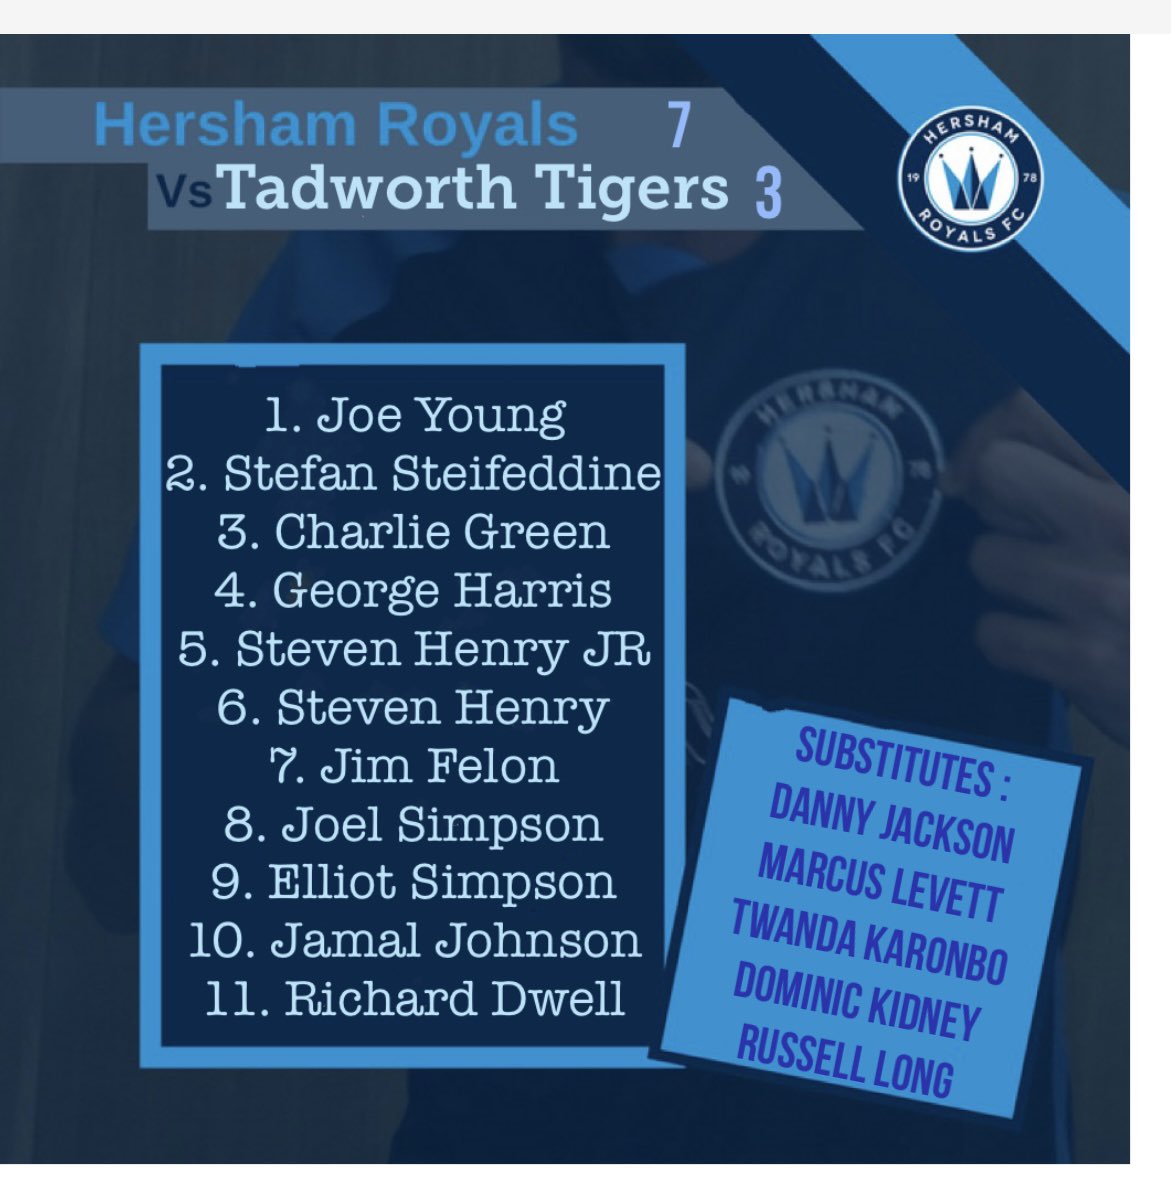 Brilliant first half going 4 nil up ! Made some changes for the second half , a bit disjointed after so many changes . Still come out on top winning 7-3 Hersham Royals 🔛🔝 @LDistrictSunday @TadworthTigers #football #WINNER #Football2023 #footballnews #FootballSunday